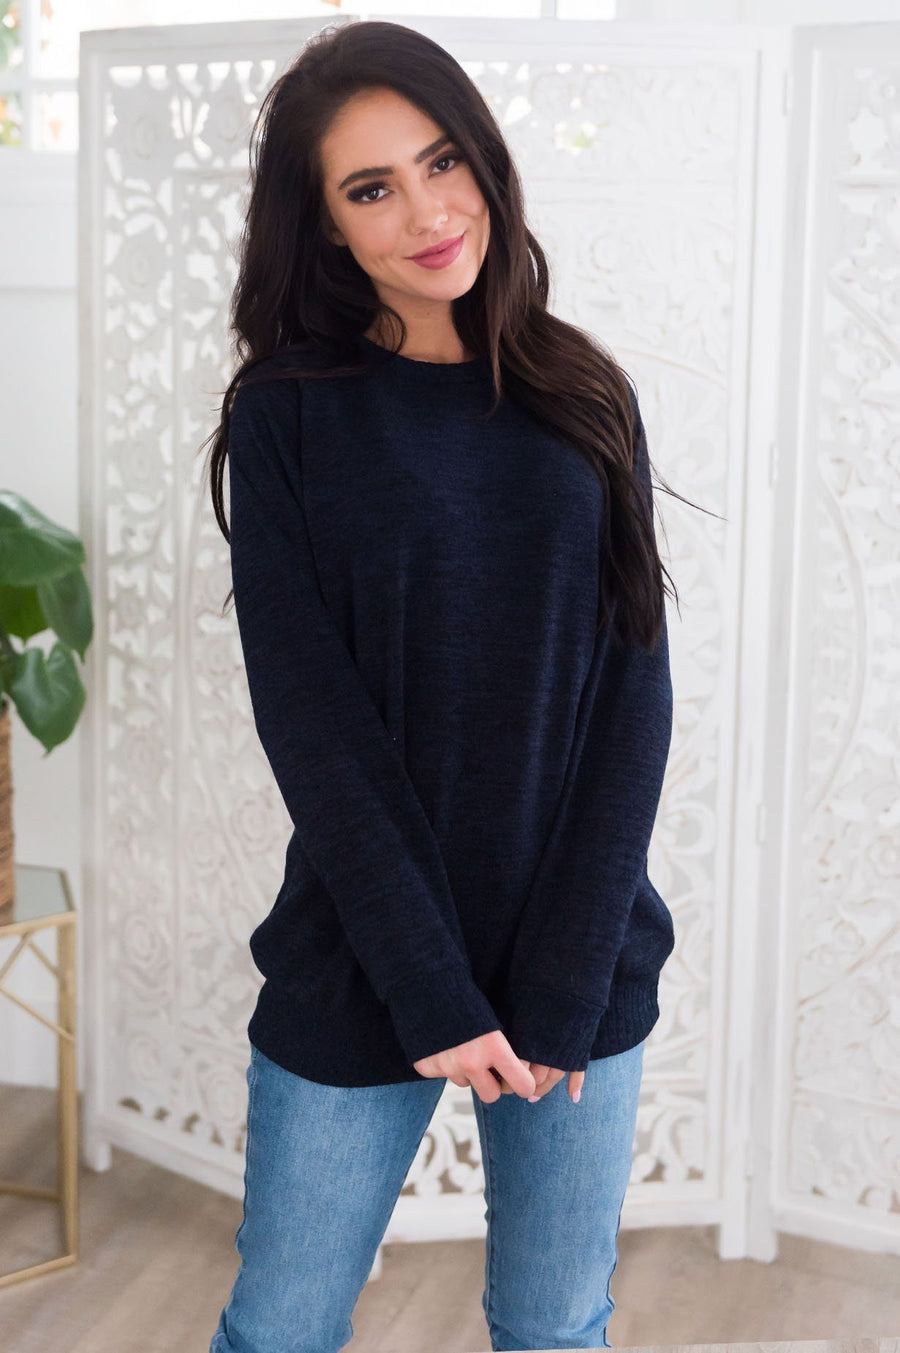 Spring Forward Modest Sweater Tops vendor-unknown 